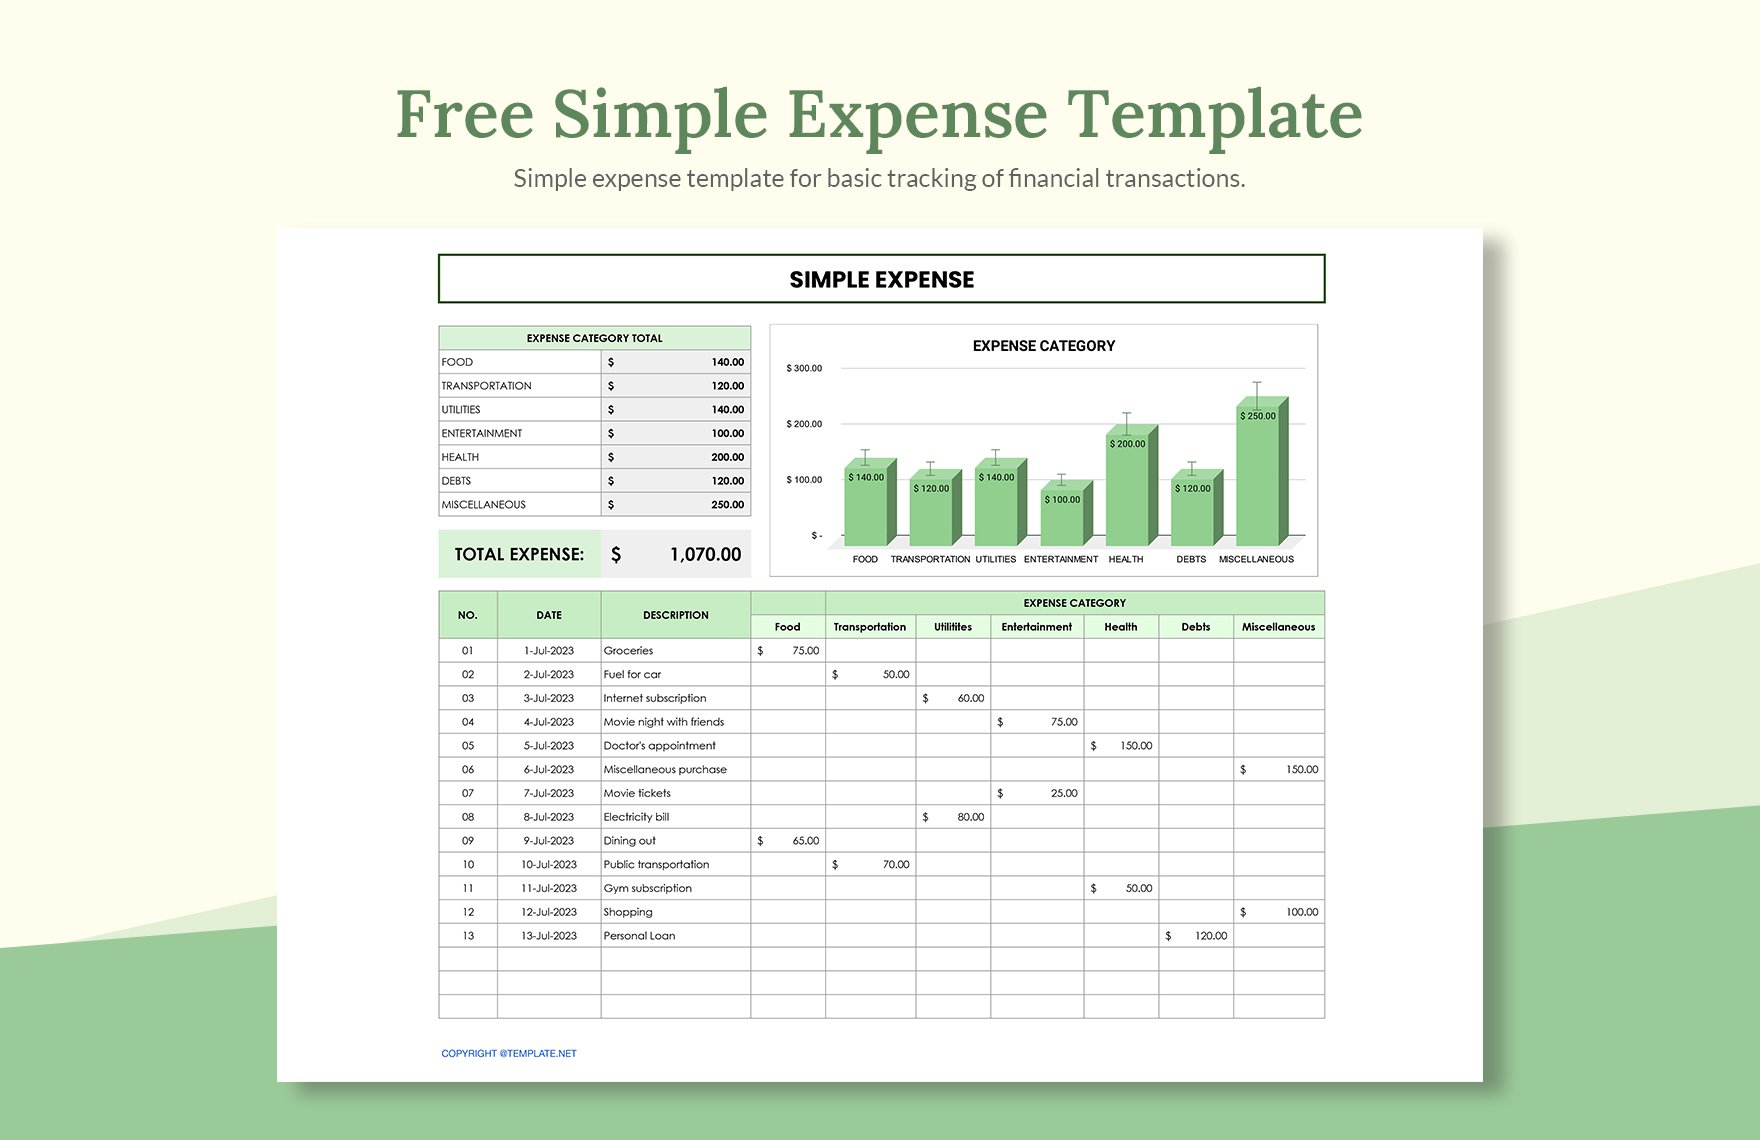 Free Simple Expense Template